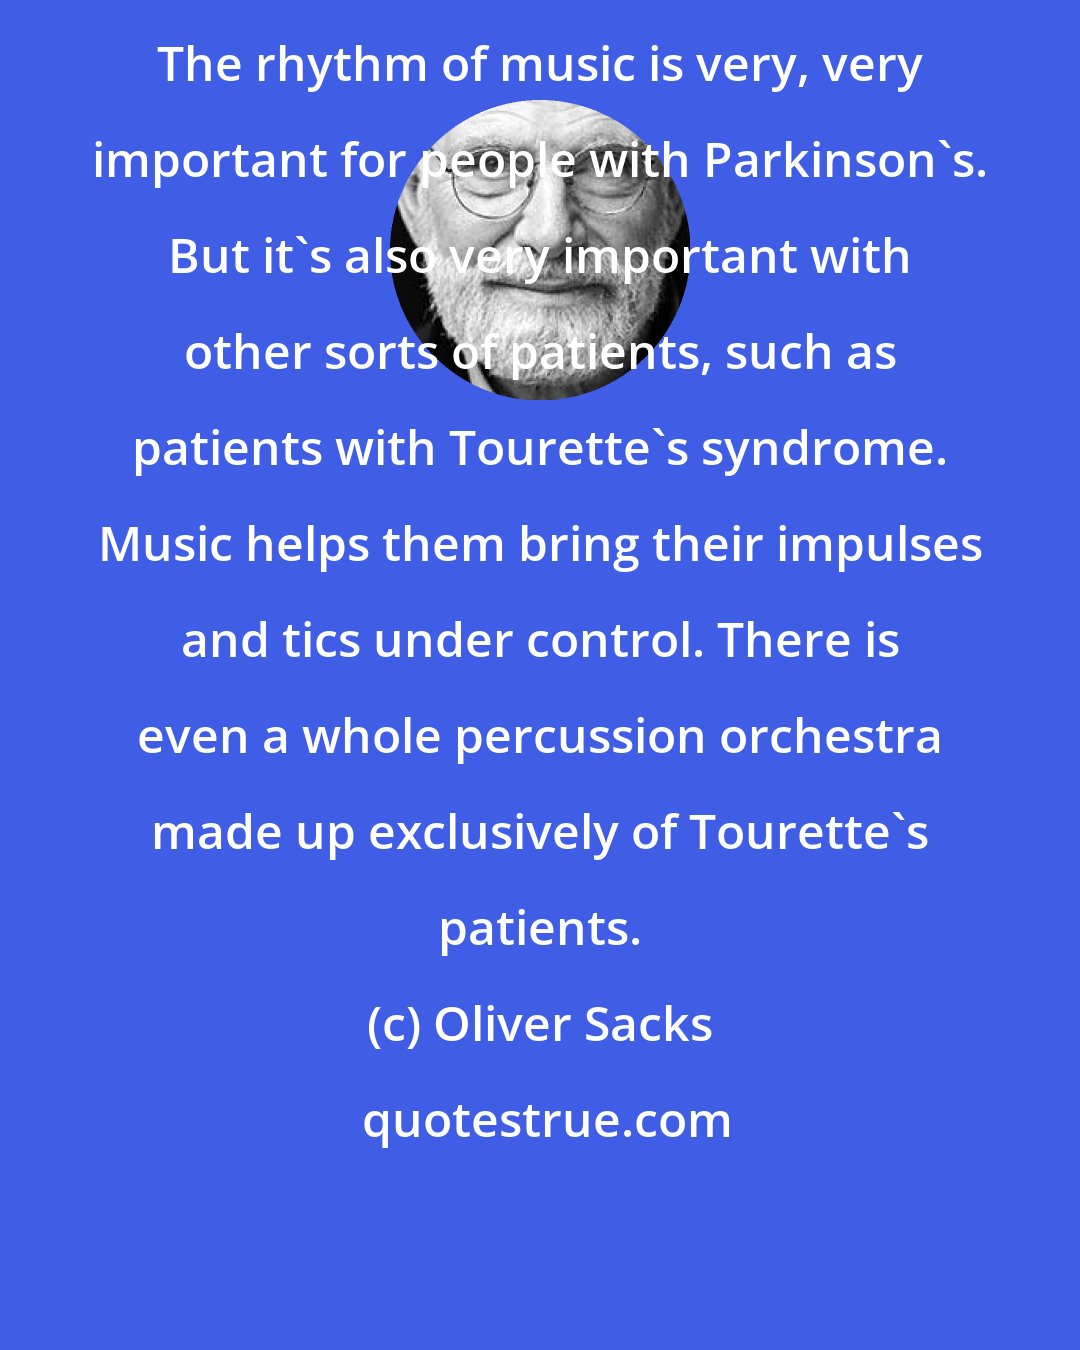 Oliver Sacks: The rhythm of music is very, very important for people with Parkinson's. But it's also very important with other sorts of patients, such as patients with Tourette's syndrome. Music helps them bring their impulses and tics under control. There is even a whole percussion orchestra made up exclusively of Tourette's patients.